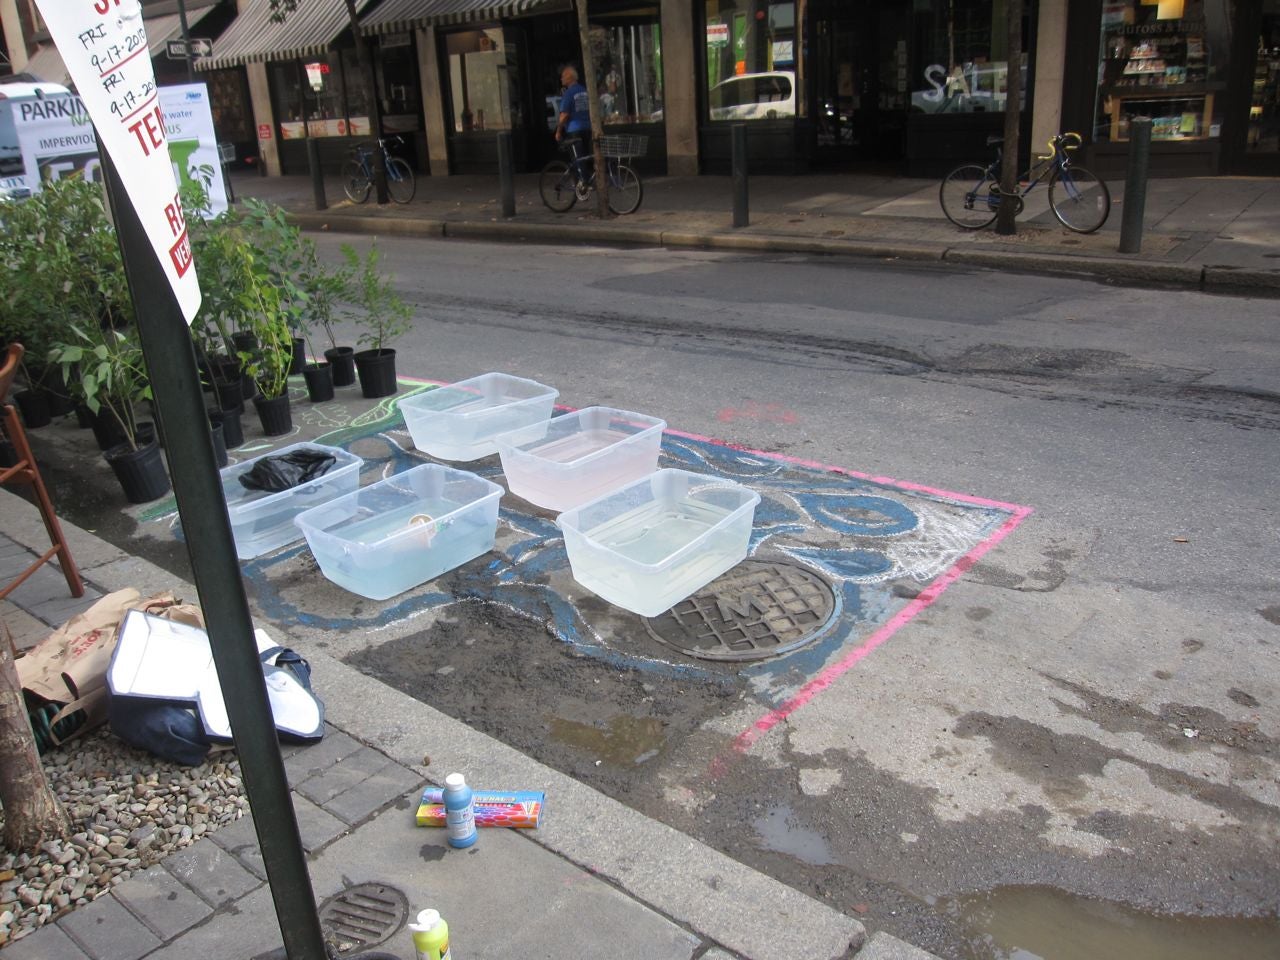 Philadelphia Water Department shows stormwater runoff concerns in its PARK(ing) Day spot.